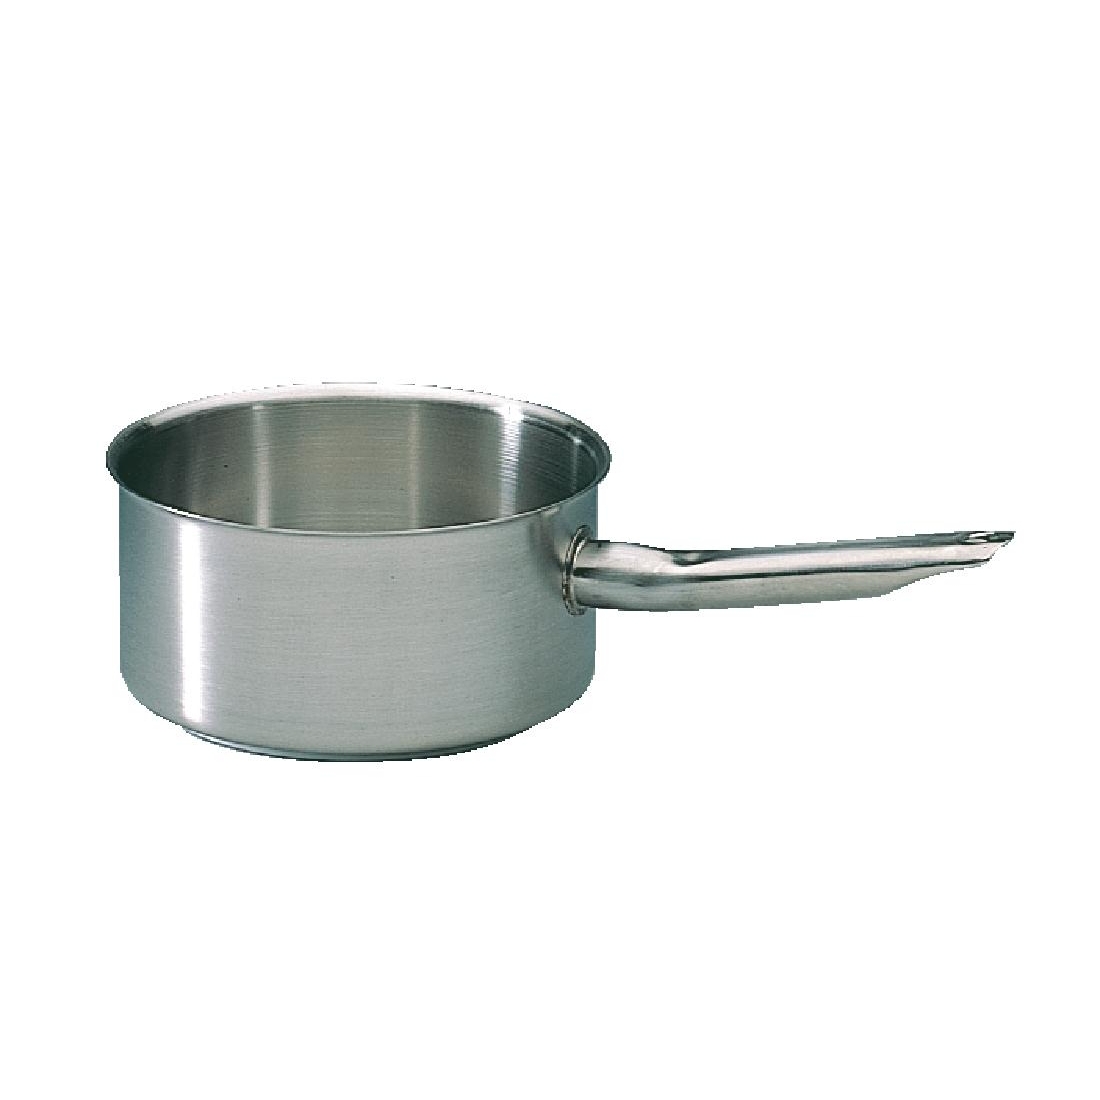 Bourgeat Stainless Steel Excellence Saucepan 3.1Ltr